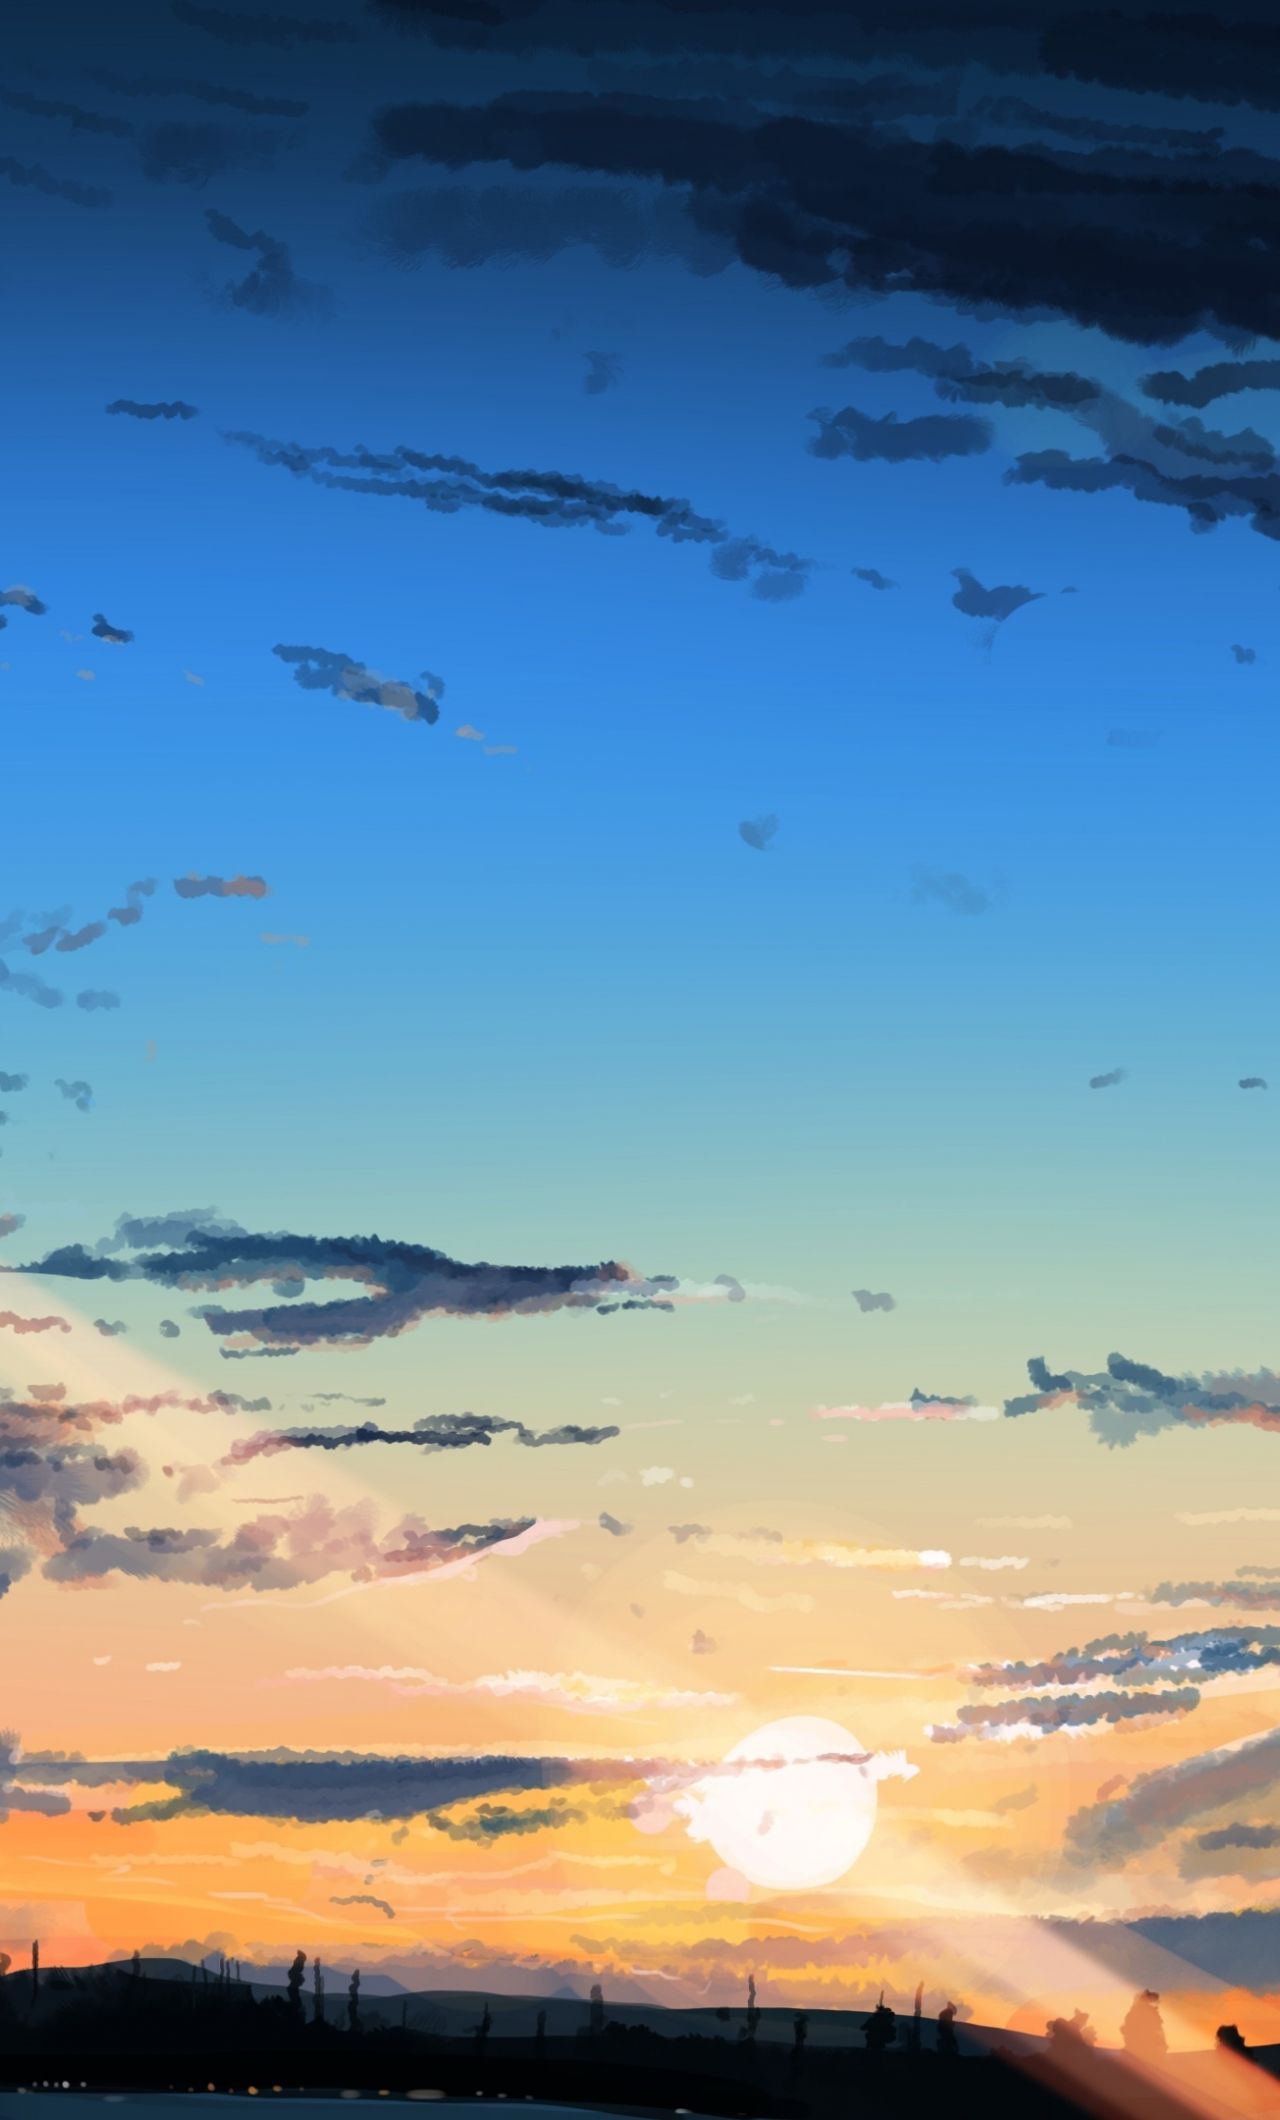 Download 1280x2120 wallpaper sunset, sky anime, clouds, original, iphone 6 plus, 1280x2120 HD image, background, 4506